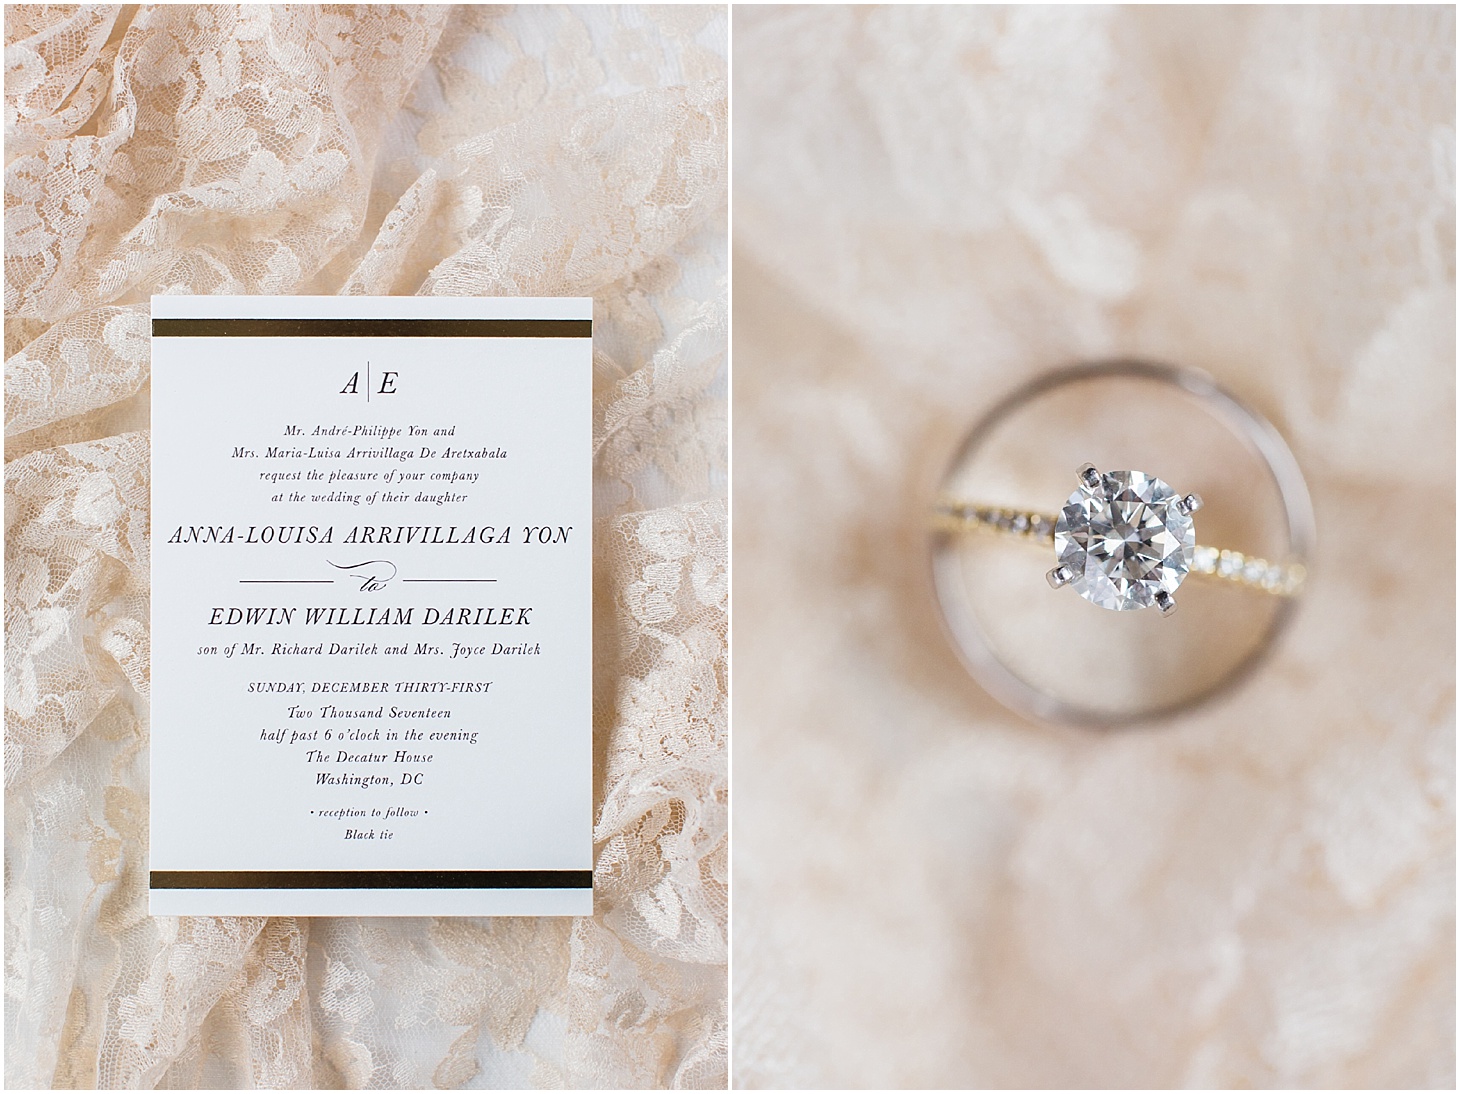 Minted Invitation and Cartier Engagement Ring Detail | French-Inspired New Years Eve Wedding at the Decatur House | Sarah Bradshaw Photography | Washington DC Wedding Photographer